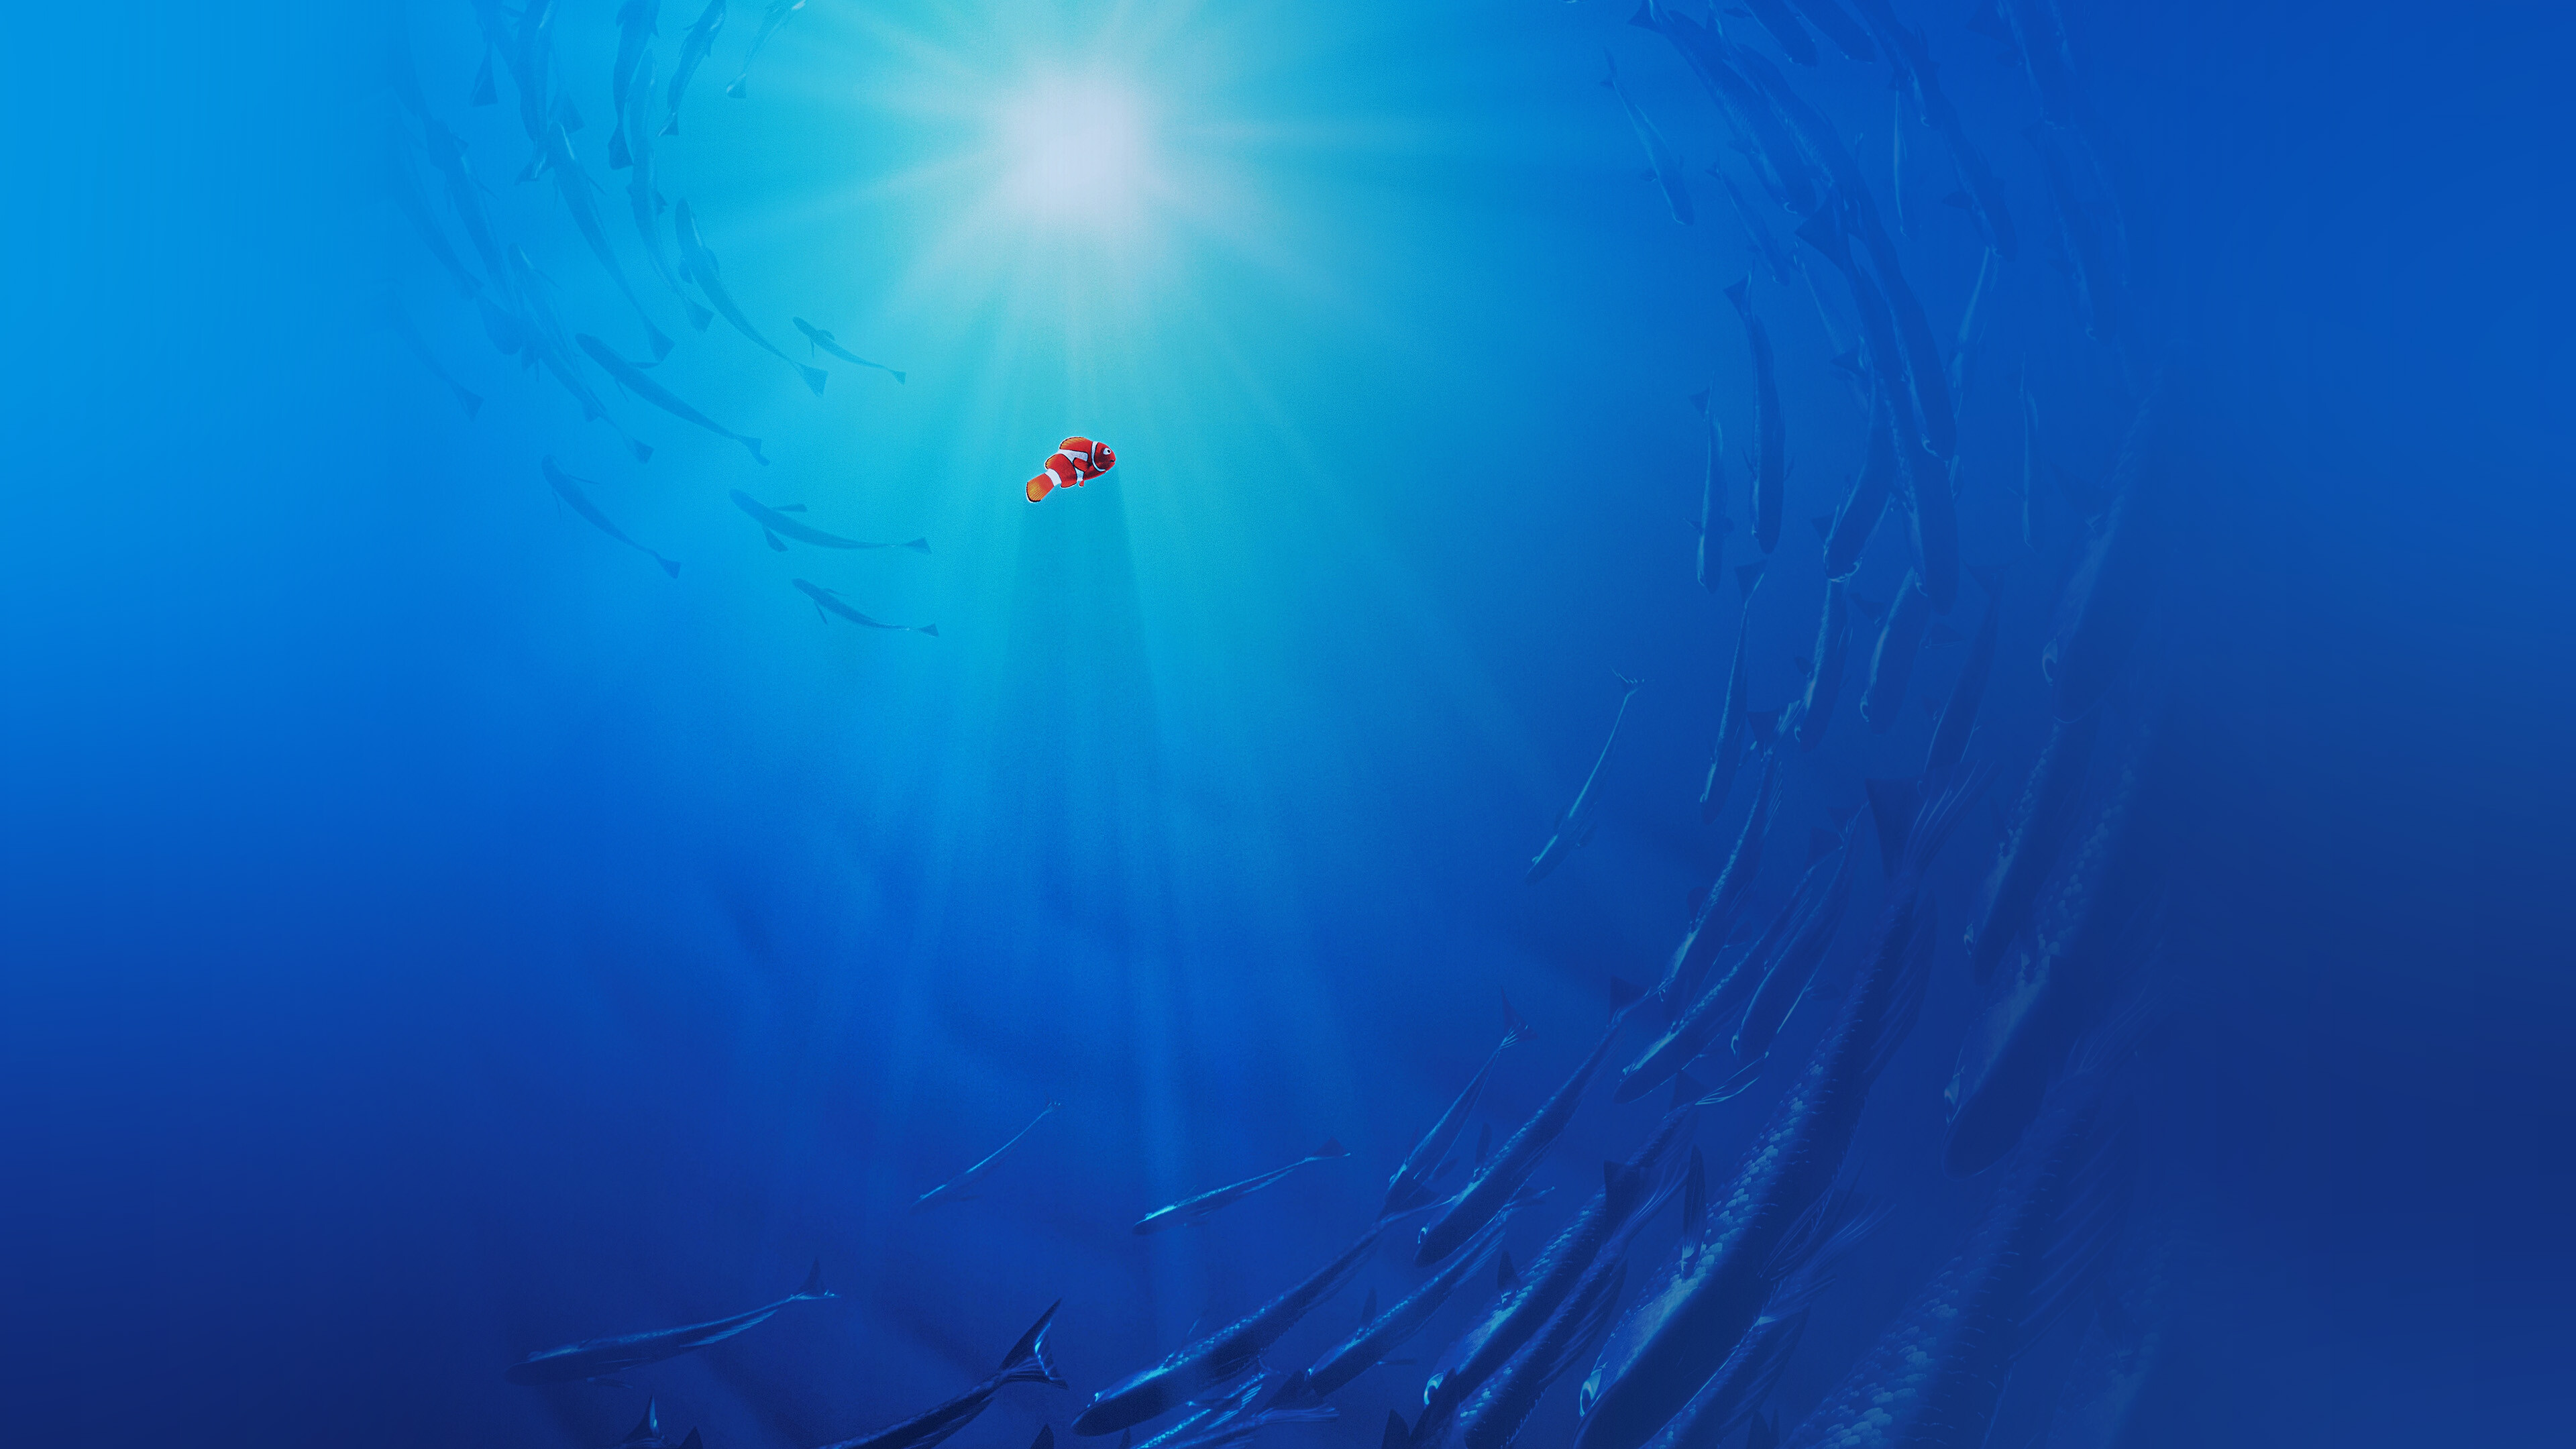 Finding Nemo: A 2003 American computer-animated comedy-drama adventure film, Produced by Pixar Animation Studios. 3840x2160 4K Wallpaper.